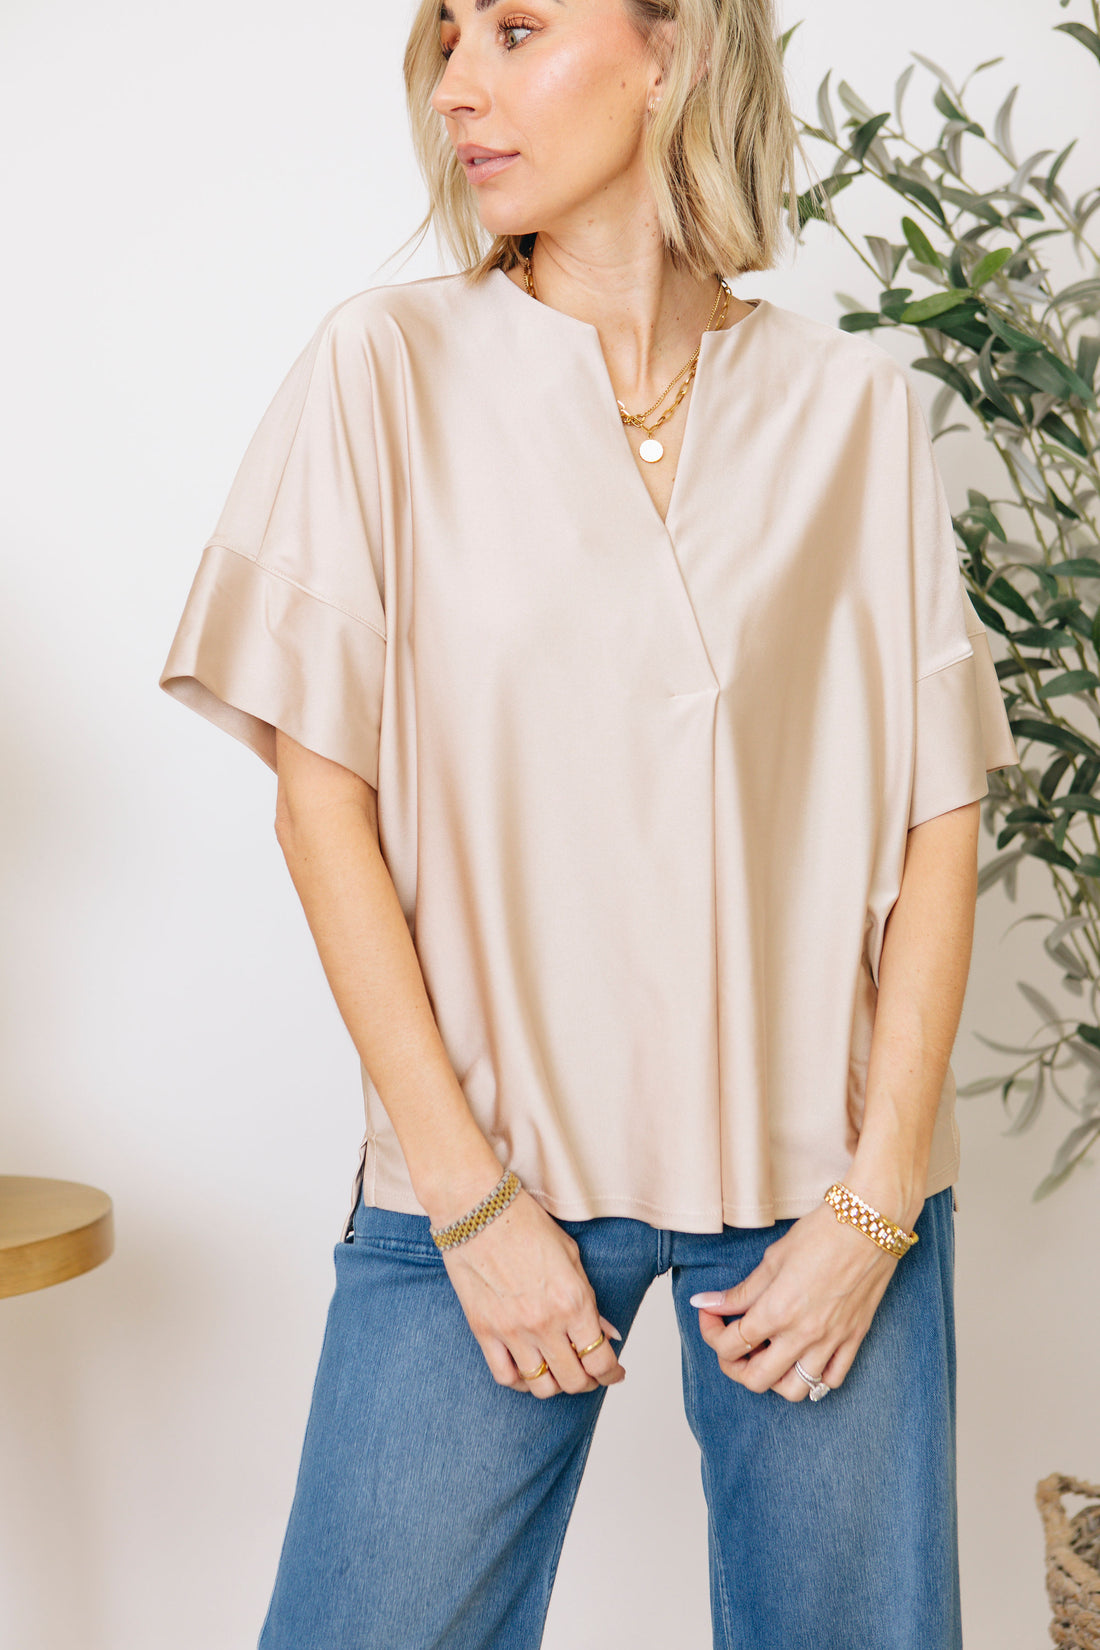 Stretchy Silky Maybe? V-Neck Front Short Sleeve Blouse (S-3XL)